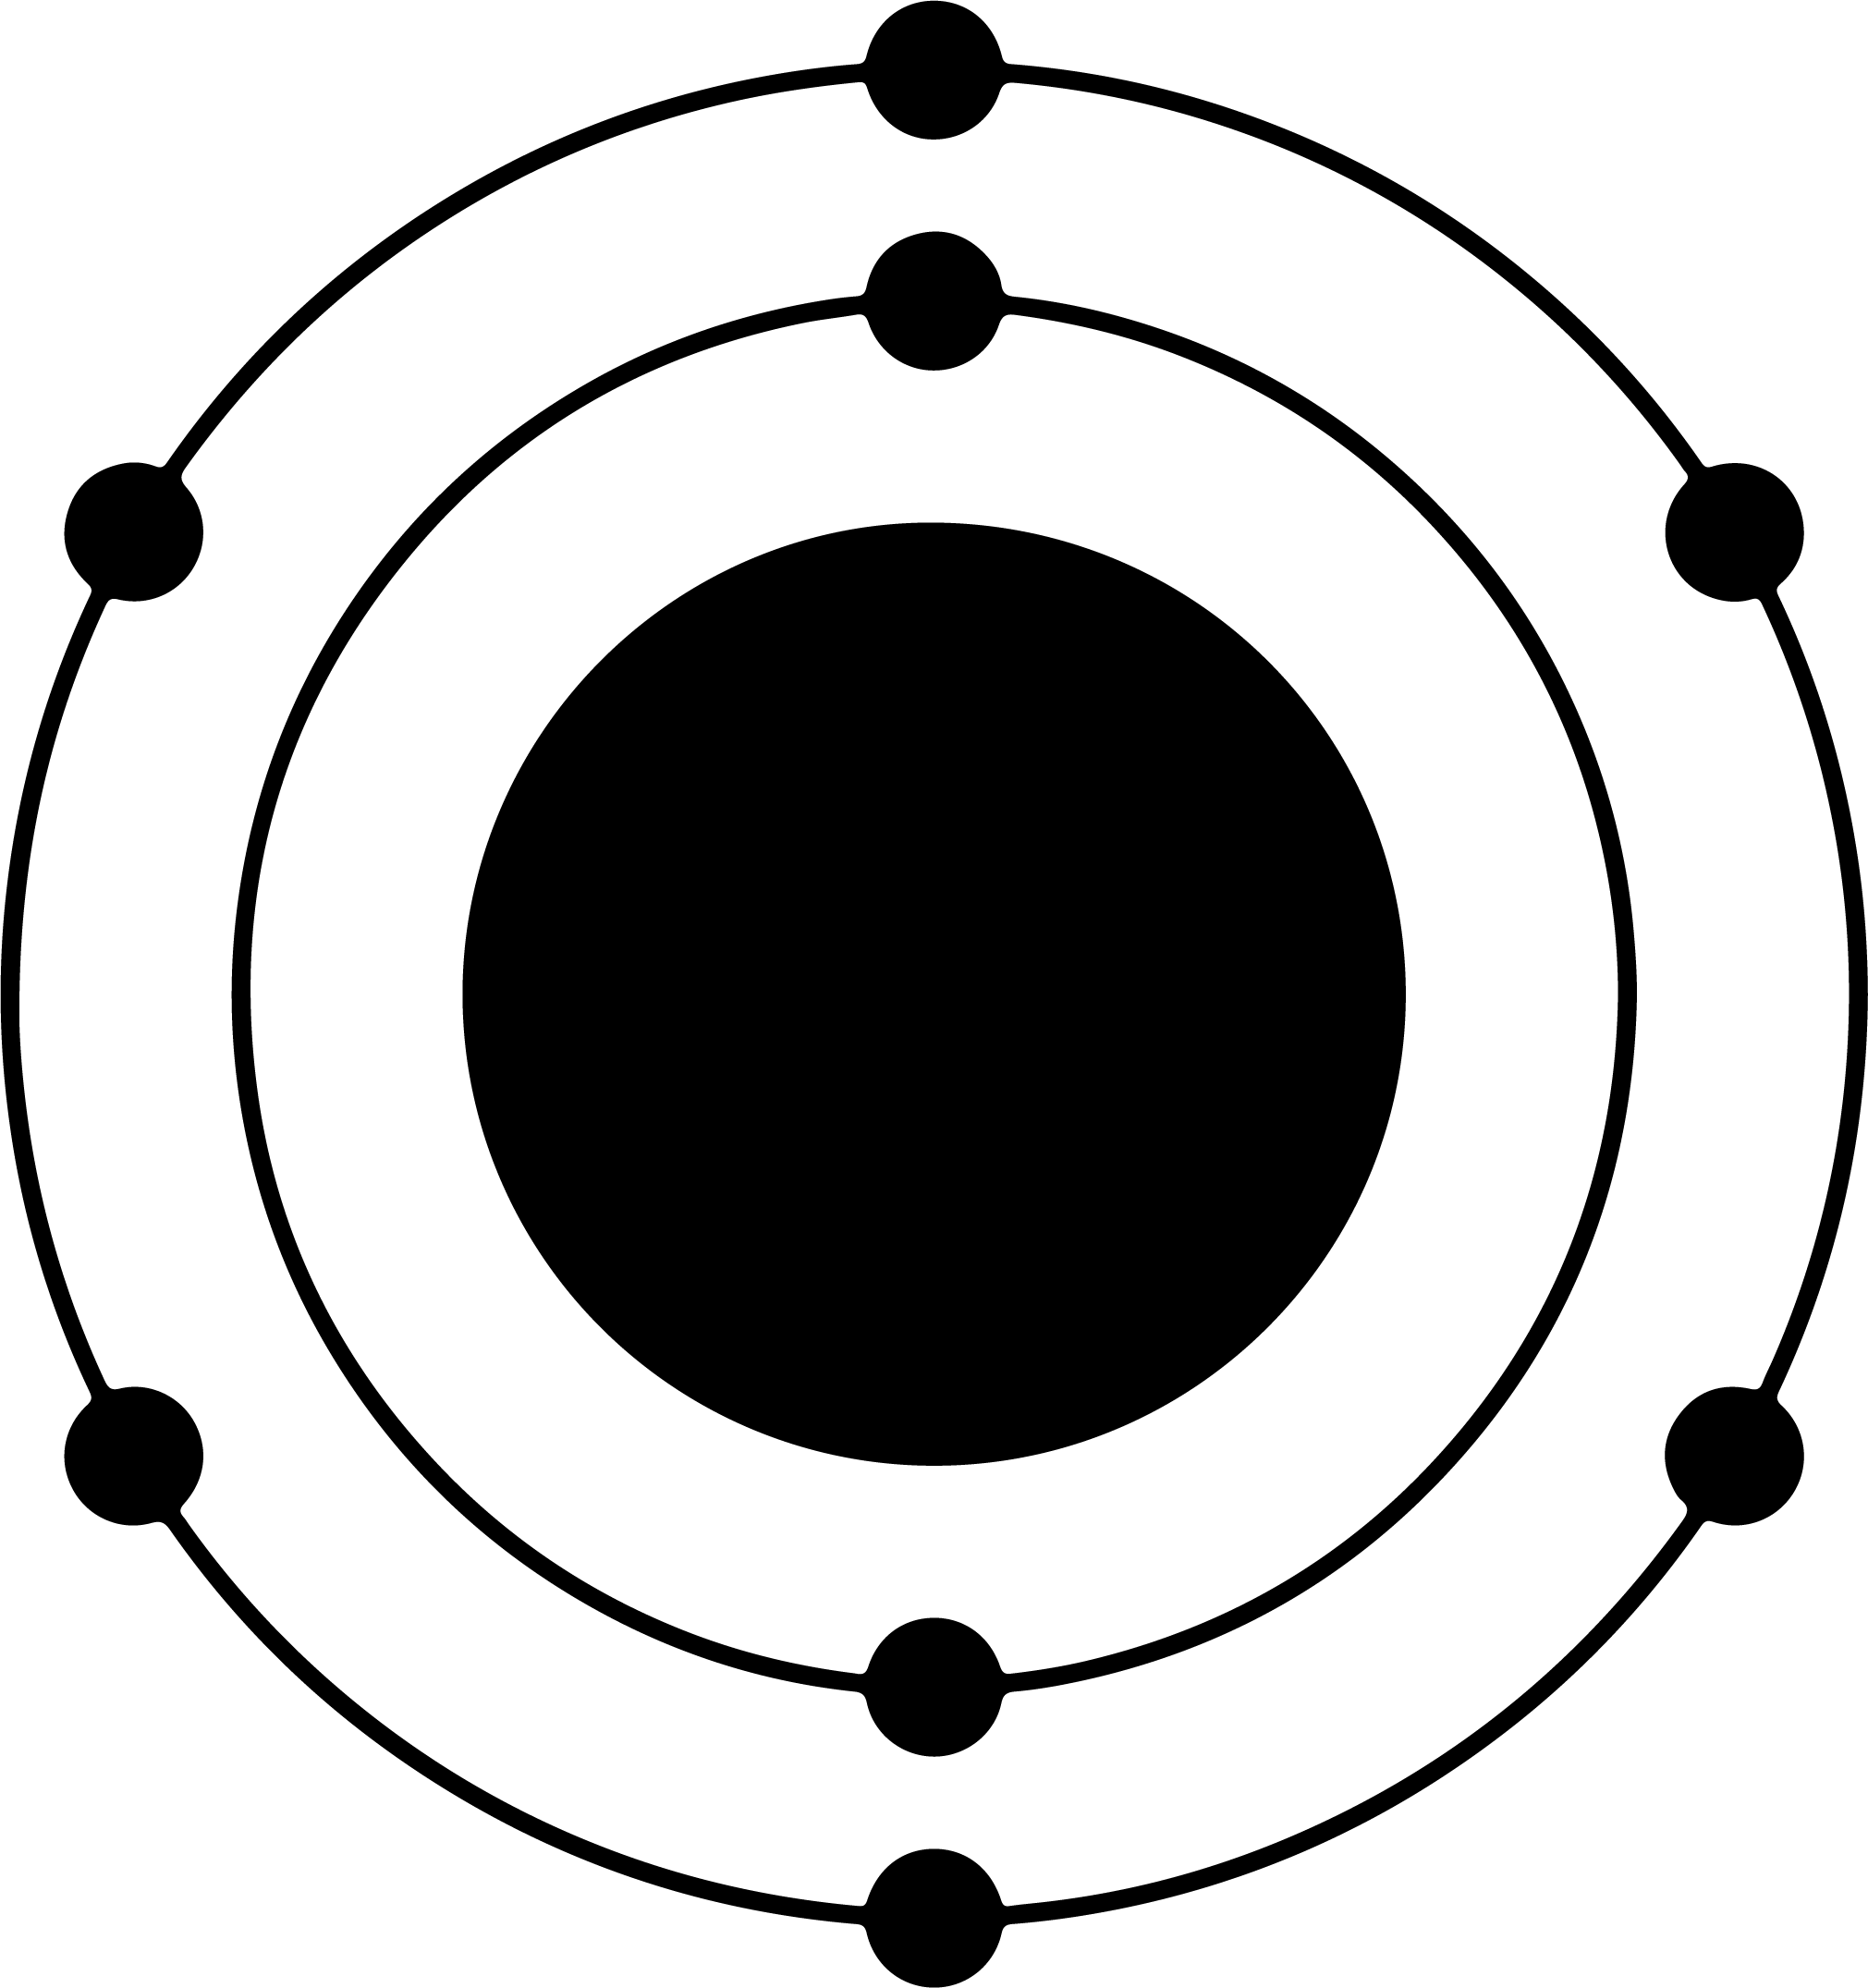 A drawing of an oxygen atom represented as a large black circle on a white background surrounded by 2 thin black rings with 2 small black circles aligned vertically on the inner ring and 6 small black circles on the second ring. The small circles are evenly spaced on their rings.